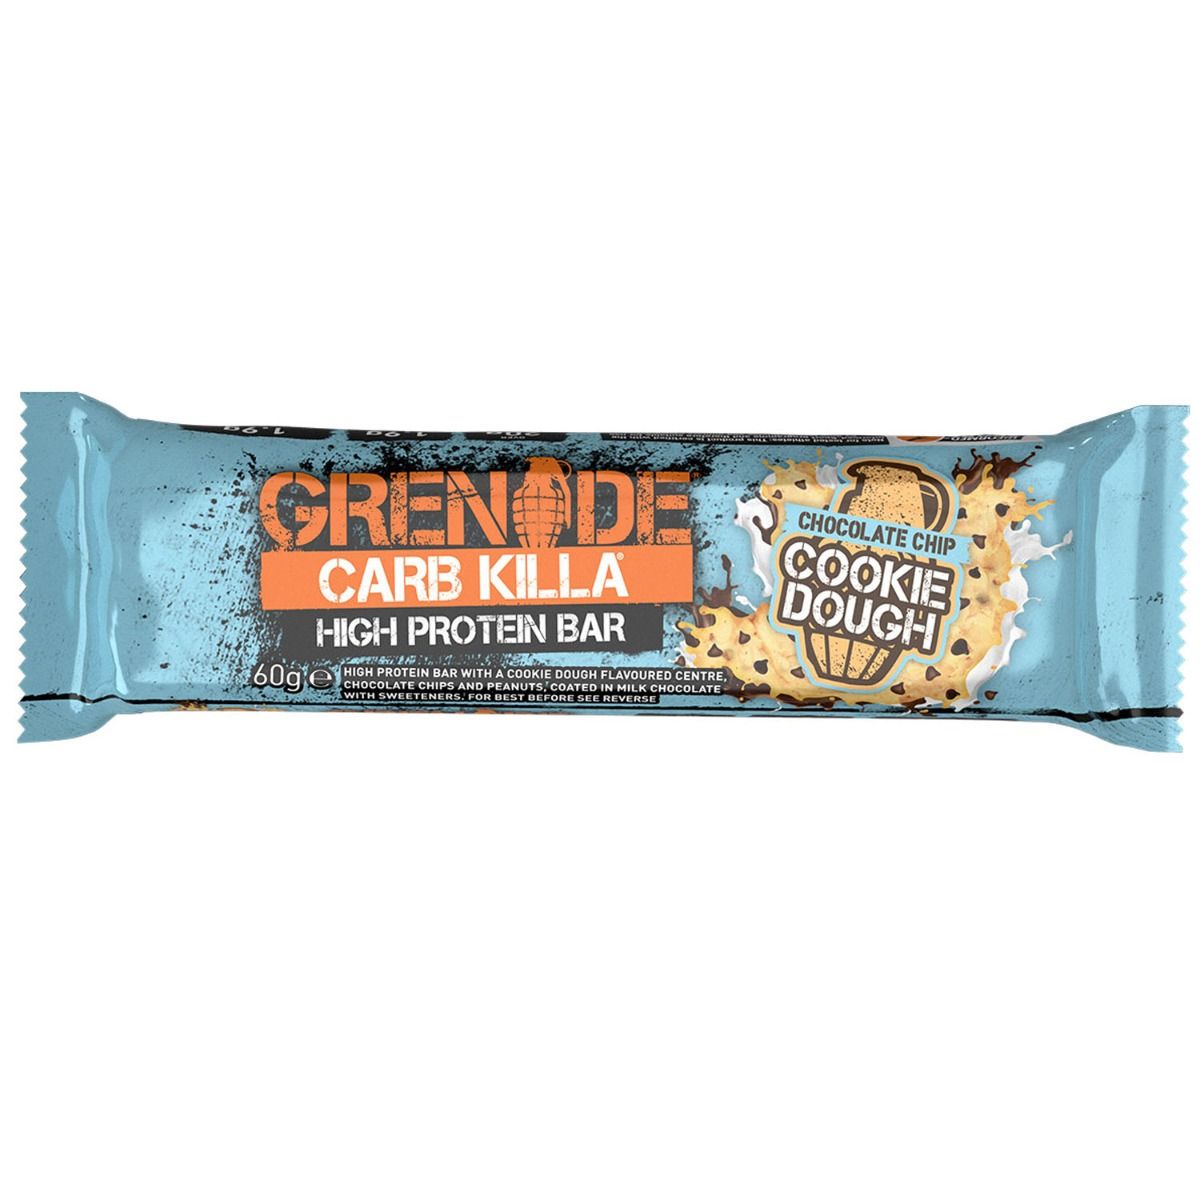 Grenade Carb Killa Chocolate Chip Cookie Dough High Protein Bar, 60 gm, Pack of 1 